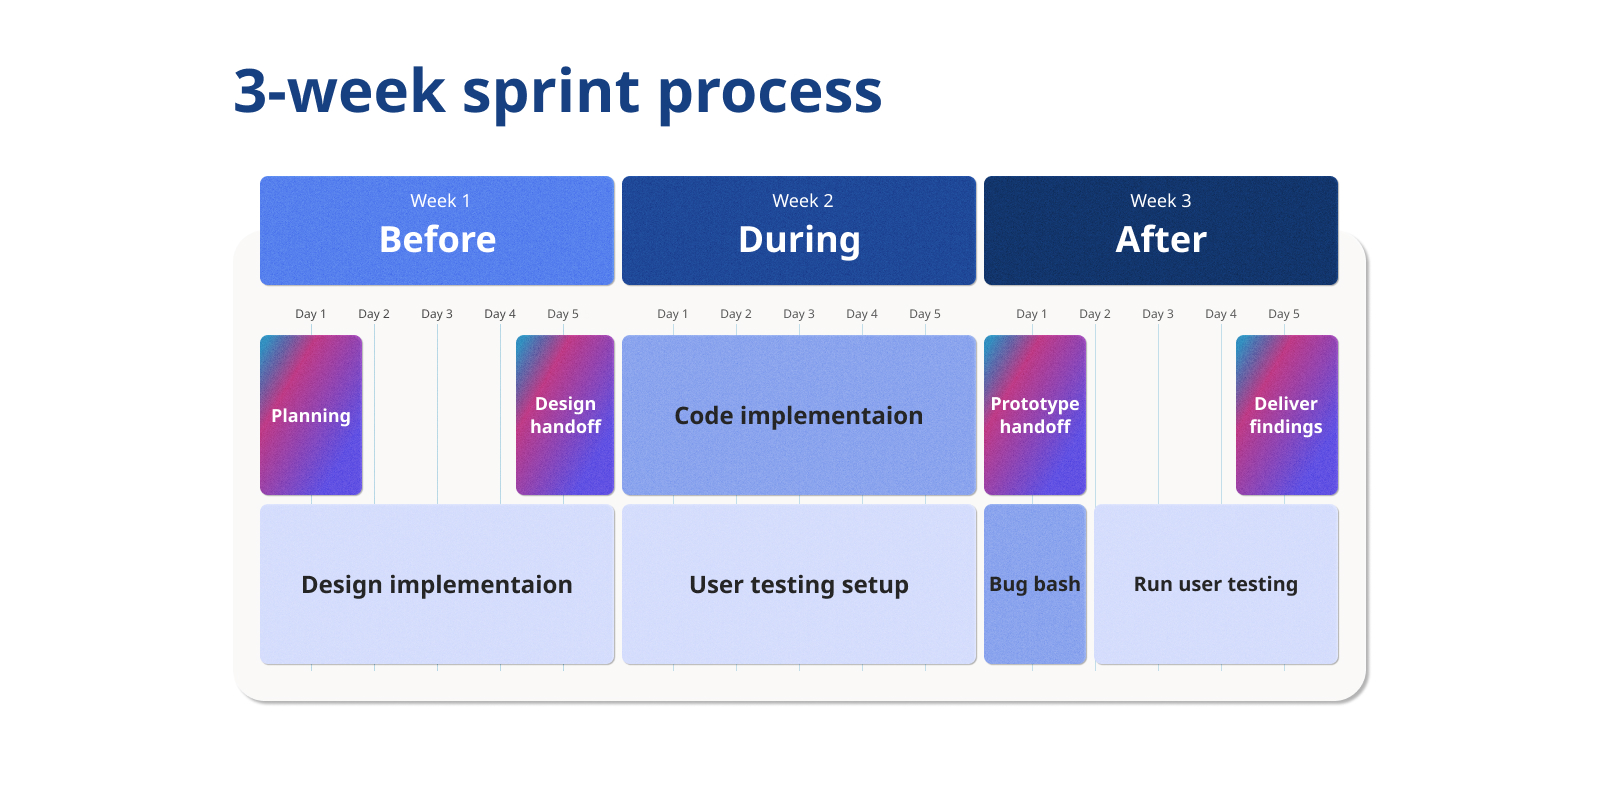 Schedule labeled "3-week sprint process." Week 1 labeled "before" is for design implementation, begins with planning and ends with design handoff. Week 2 labeled "during" is for code implementation and user testing setup. Week 3 labeled "after" begings with prototype handoff and ends with deliver findings and is for bug bash and running user testing.